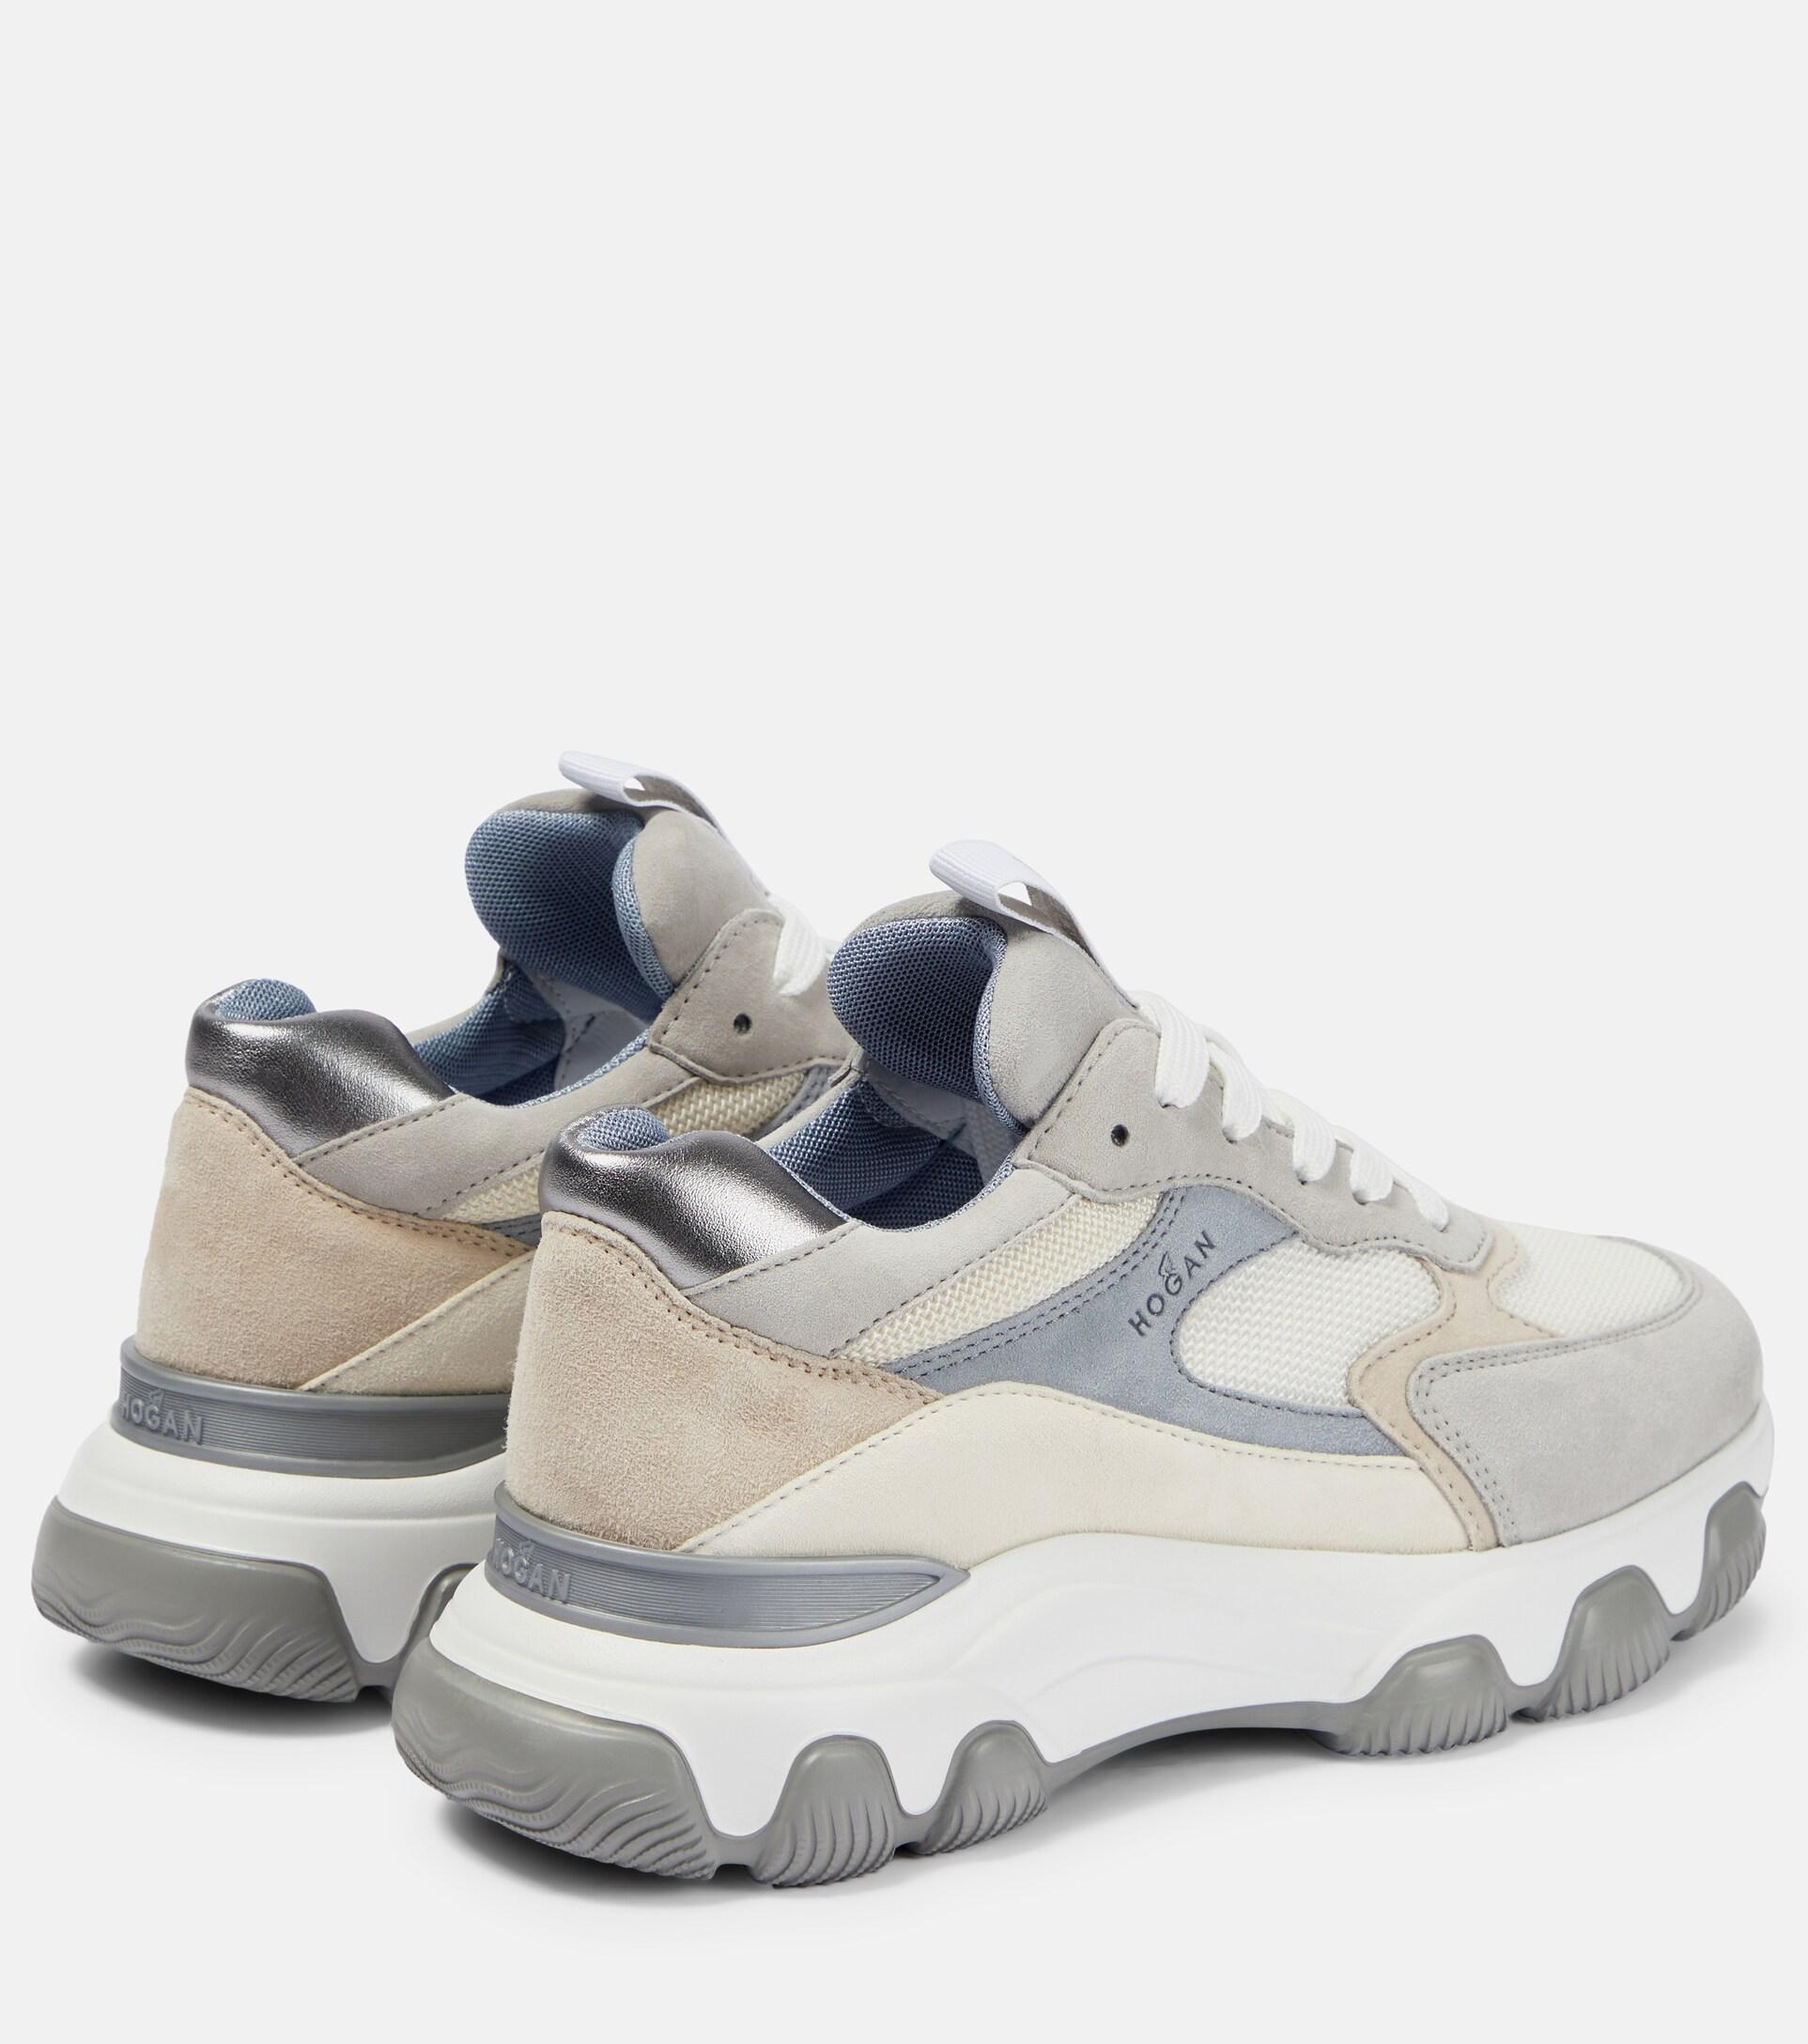 Hogan Hyperactive Leather And Suede Sneakers in White | Lyst